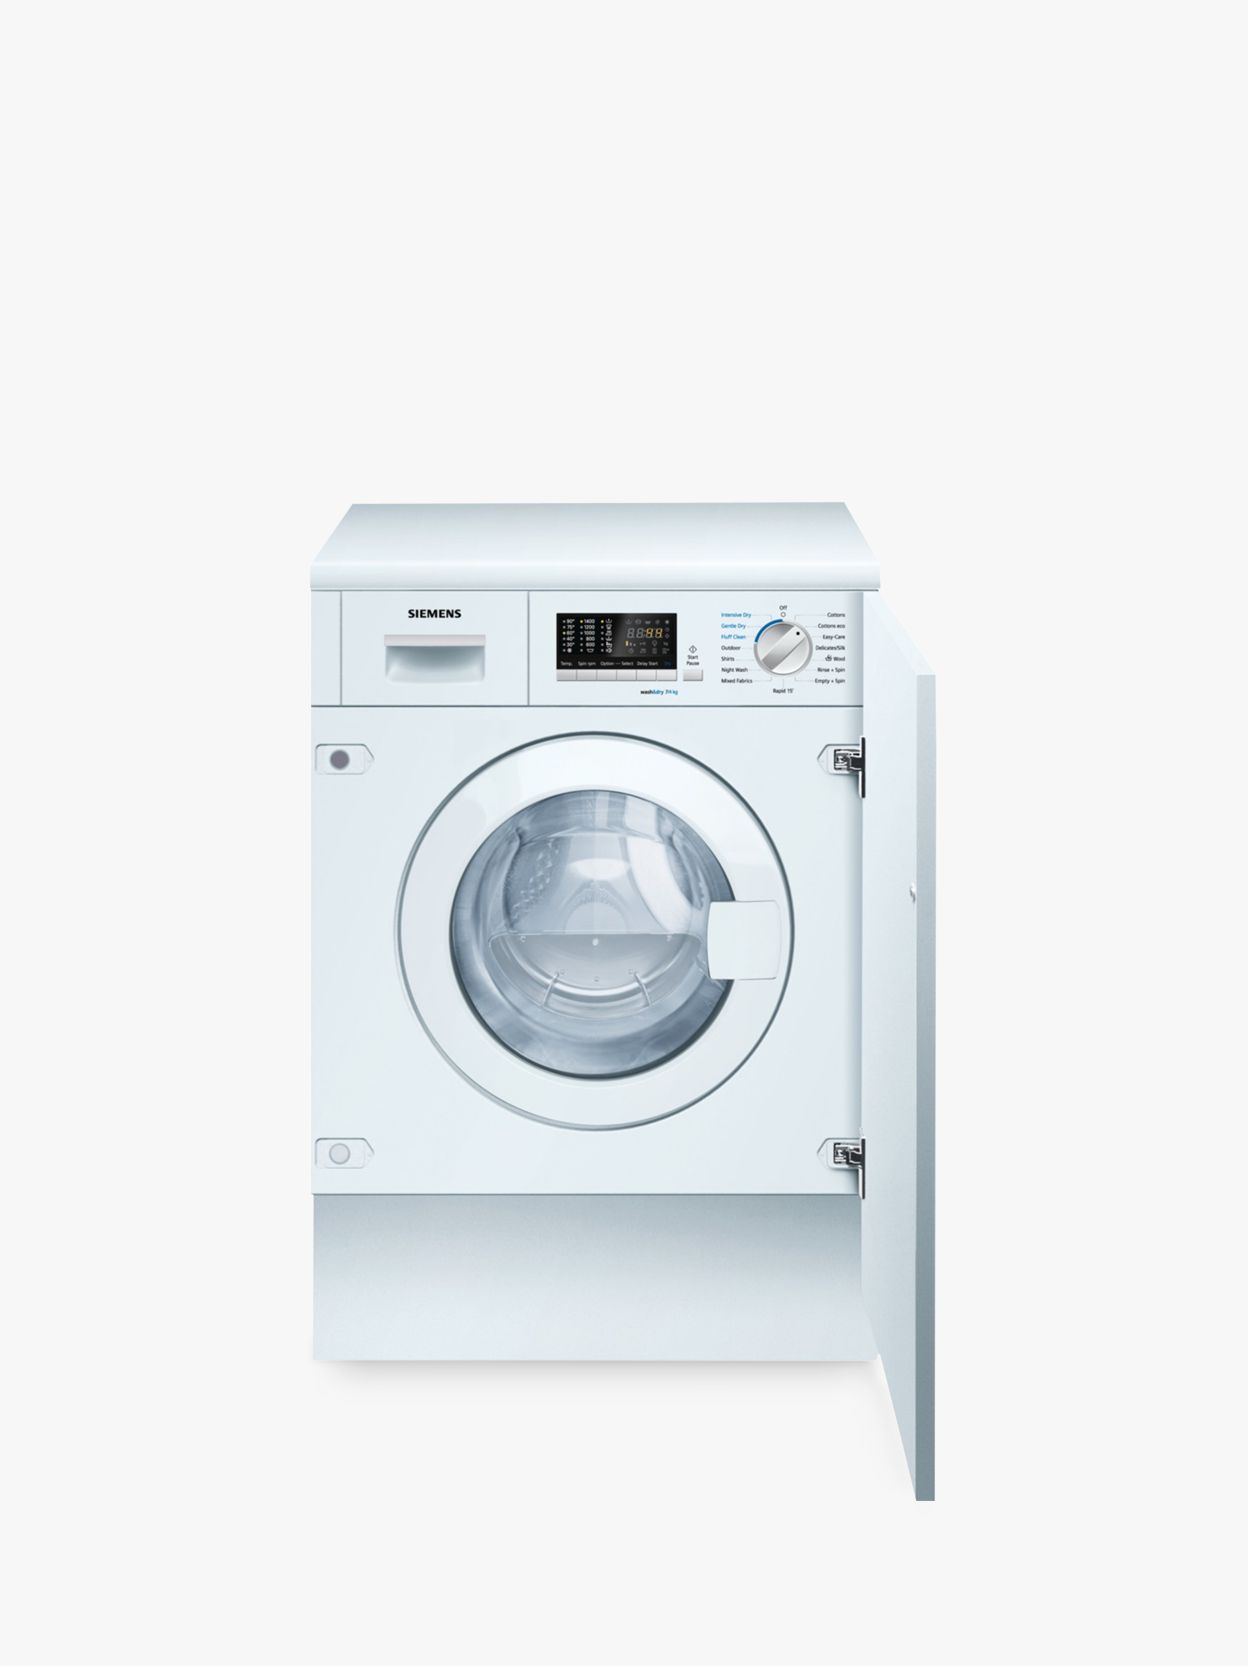 Siemens iQ500 WK14D541GB Integrated Washer Dryer, 7kg Wash/4kg Dry Load, B Energy Rating, 1400rpm Spin